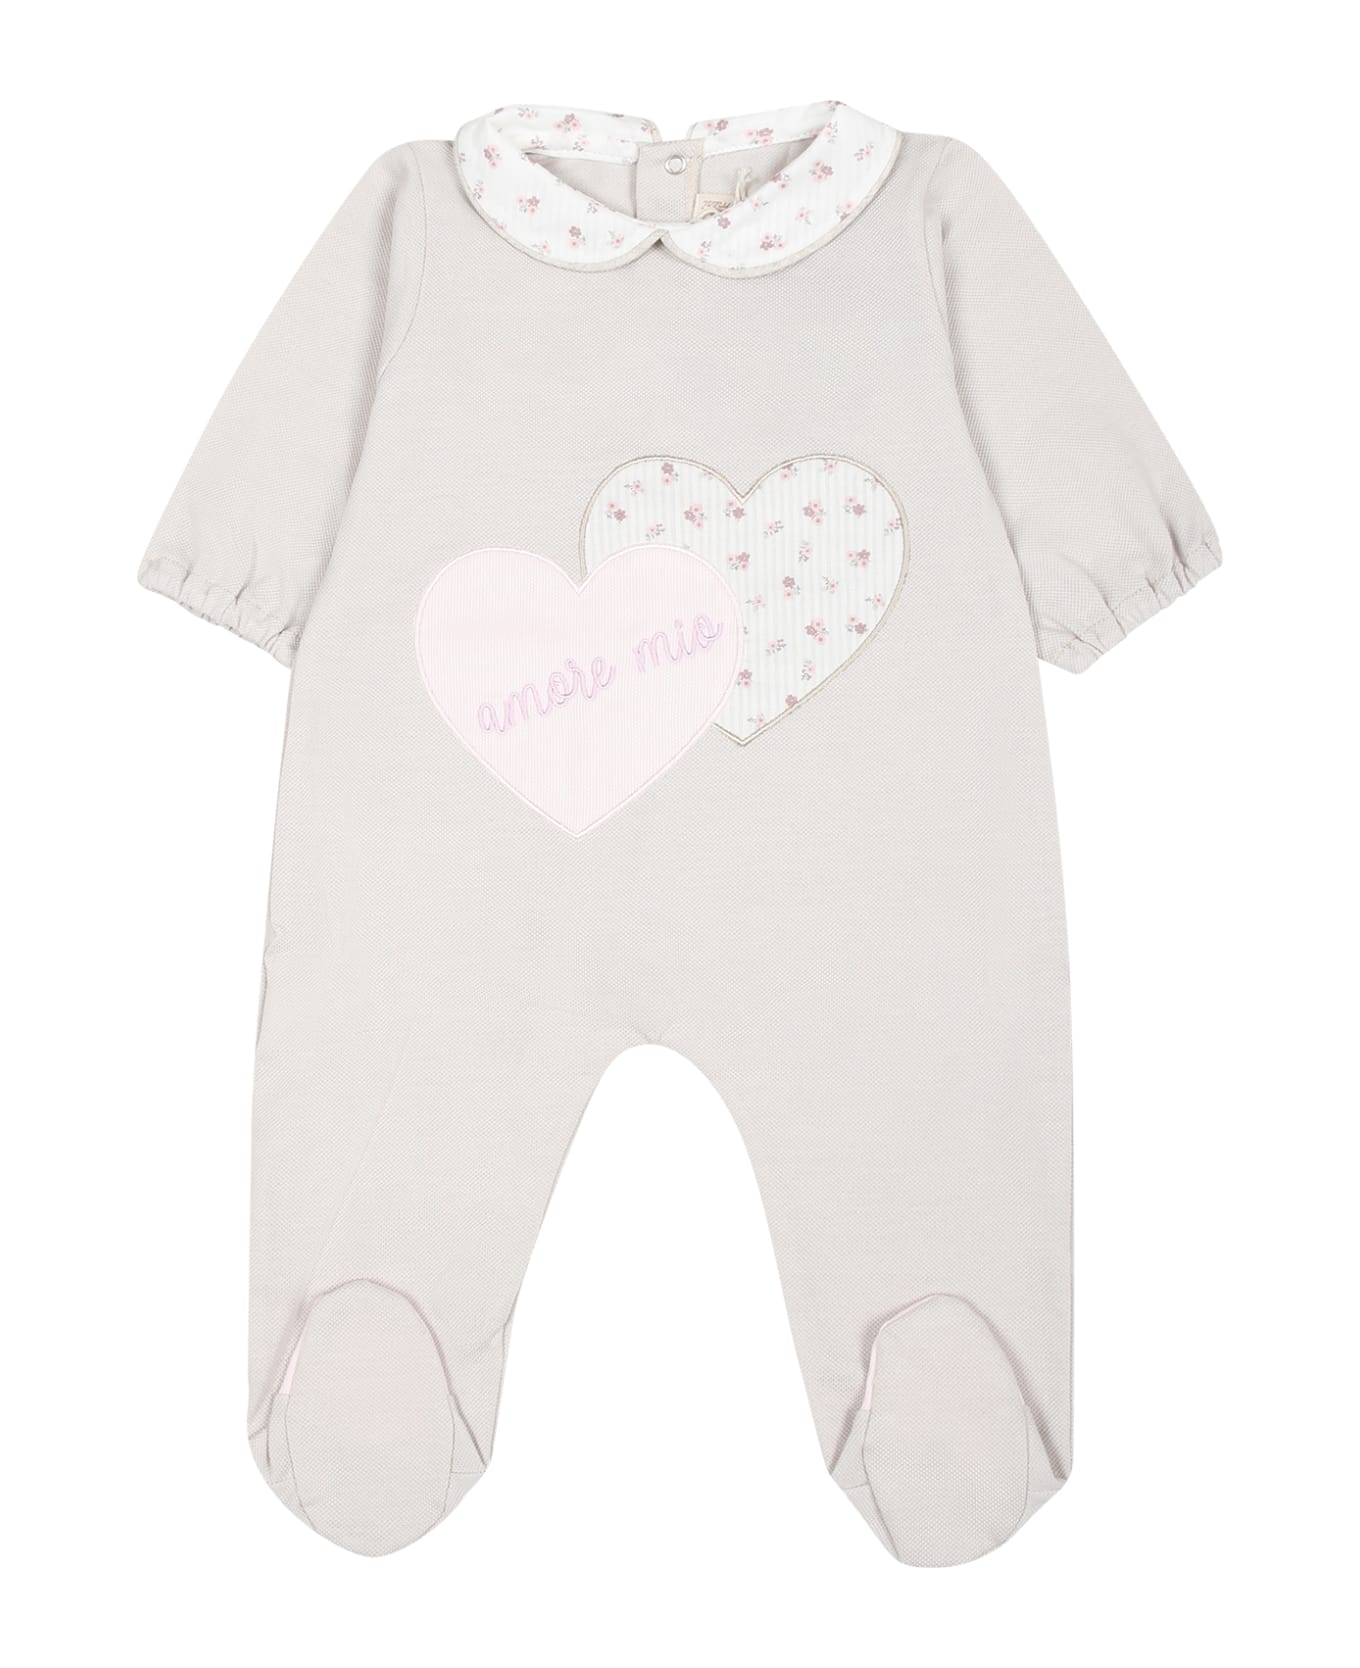 La stupenderia Beige Babygrow For Baby Girl With Hearts And Writing - Beige ボディスーツ＆セットアップ